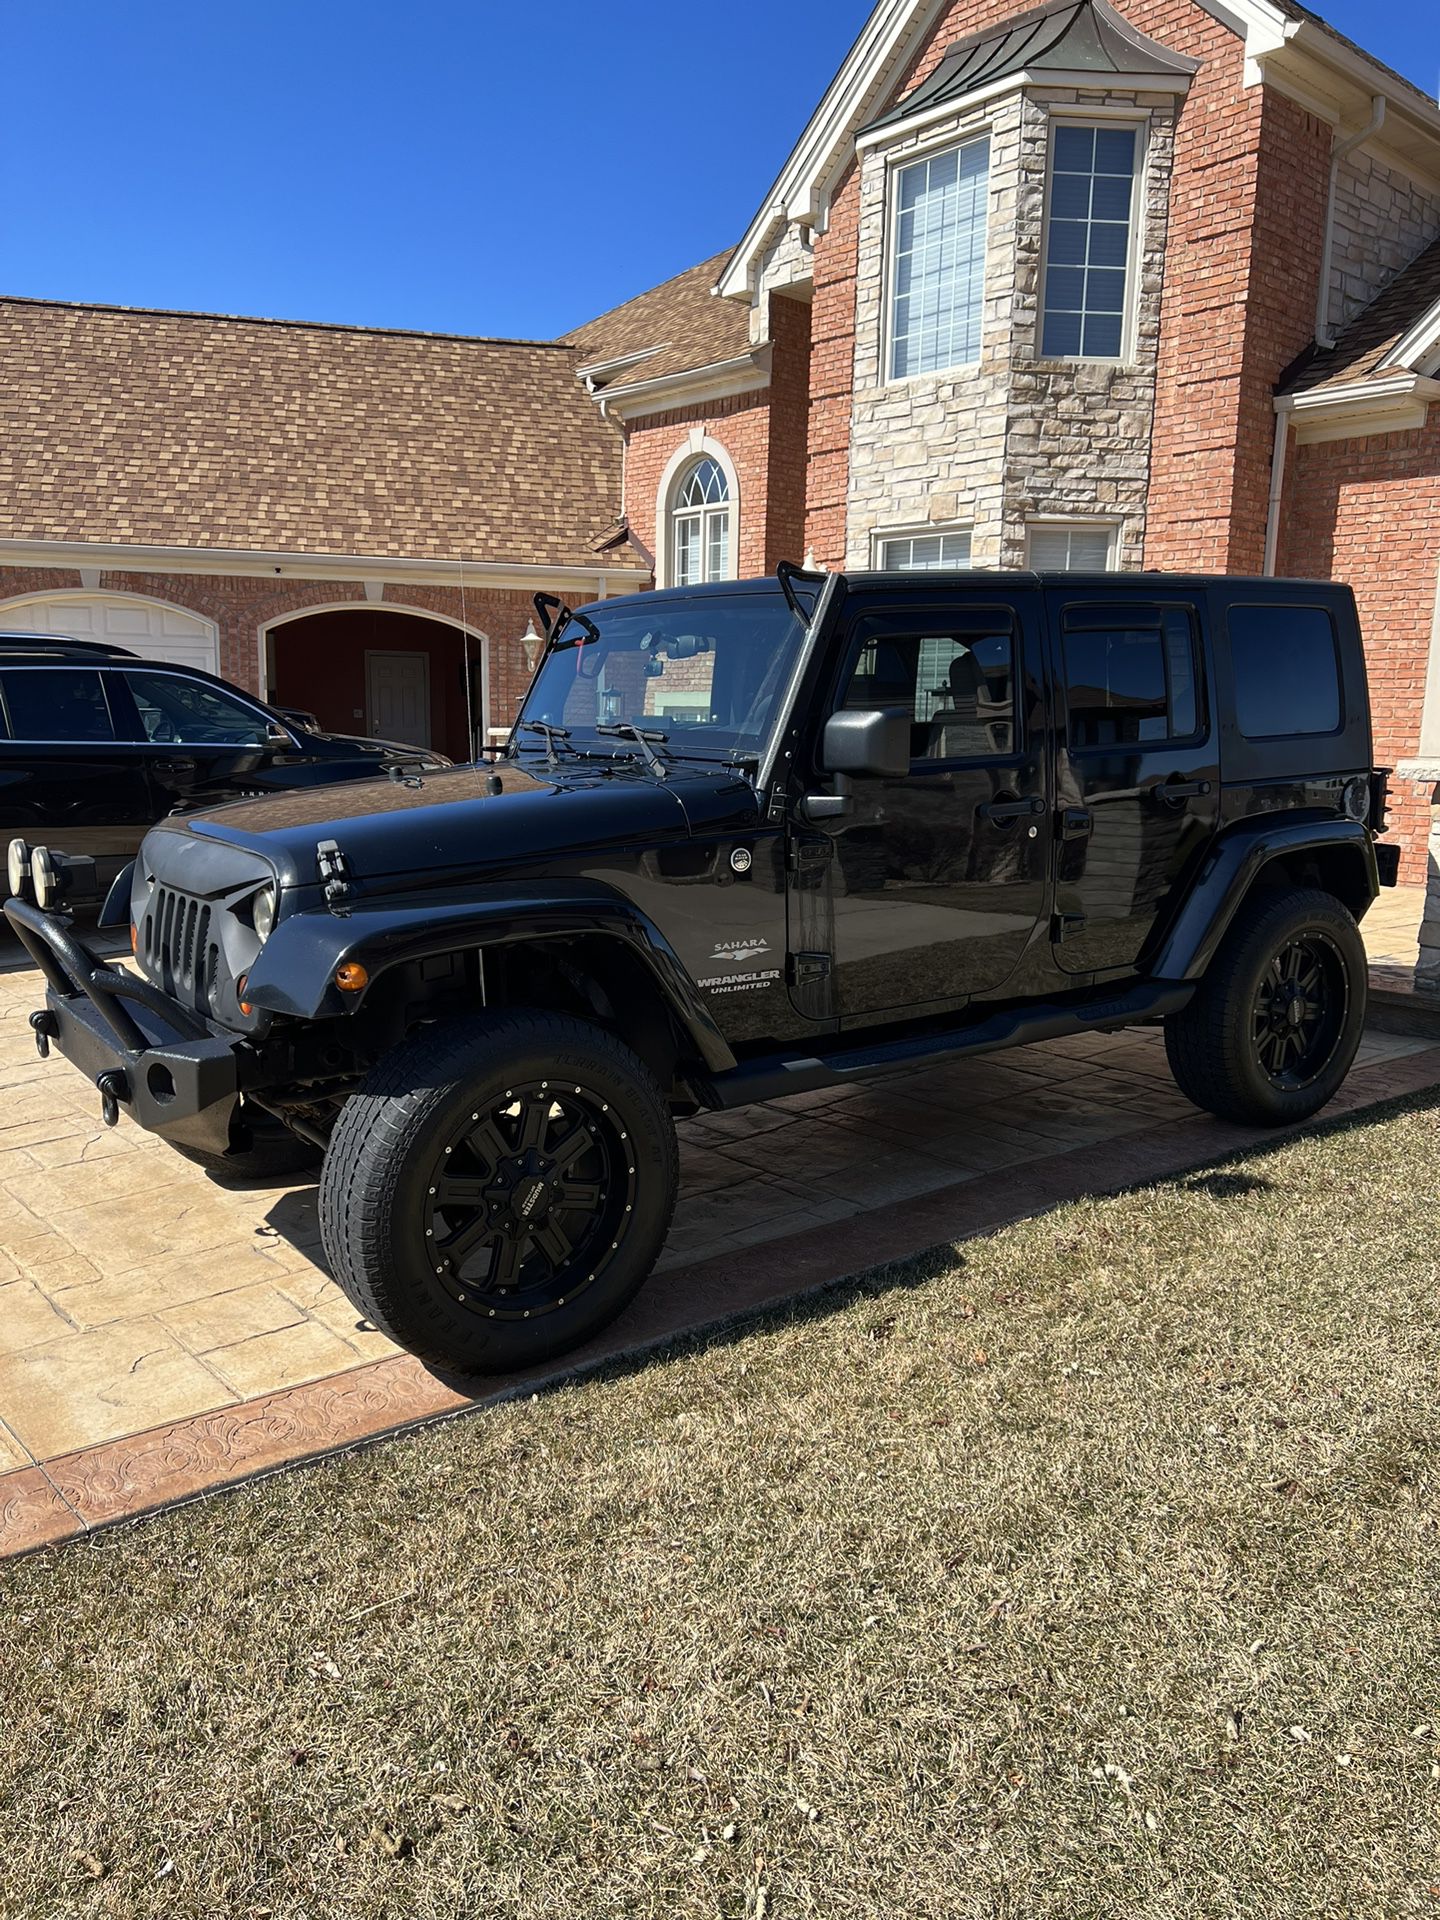 2009 Jeep Wrangler for Sale in Shelby Township, MI - OfferUp